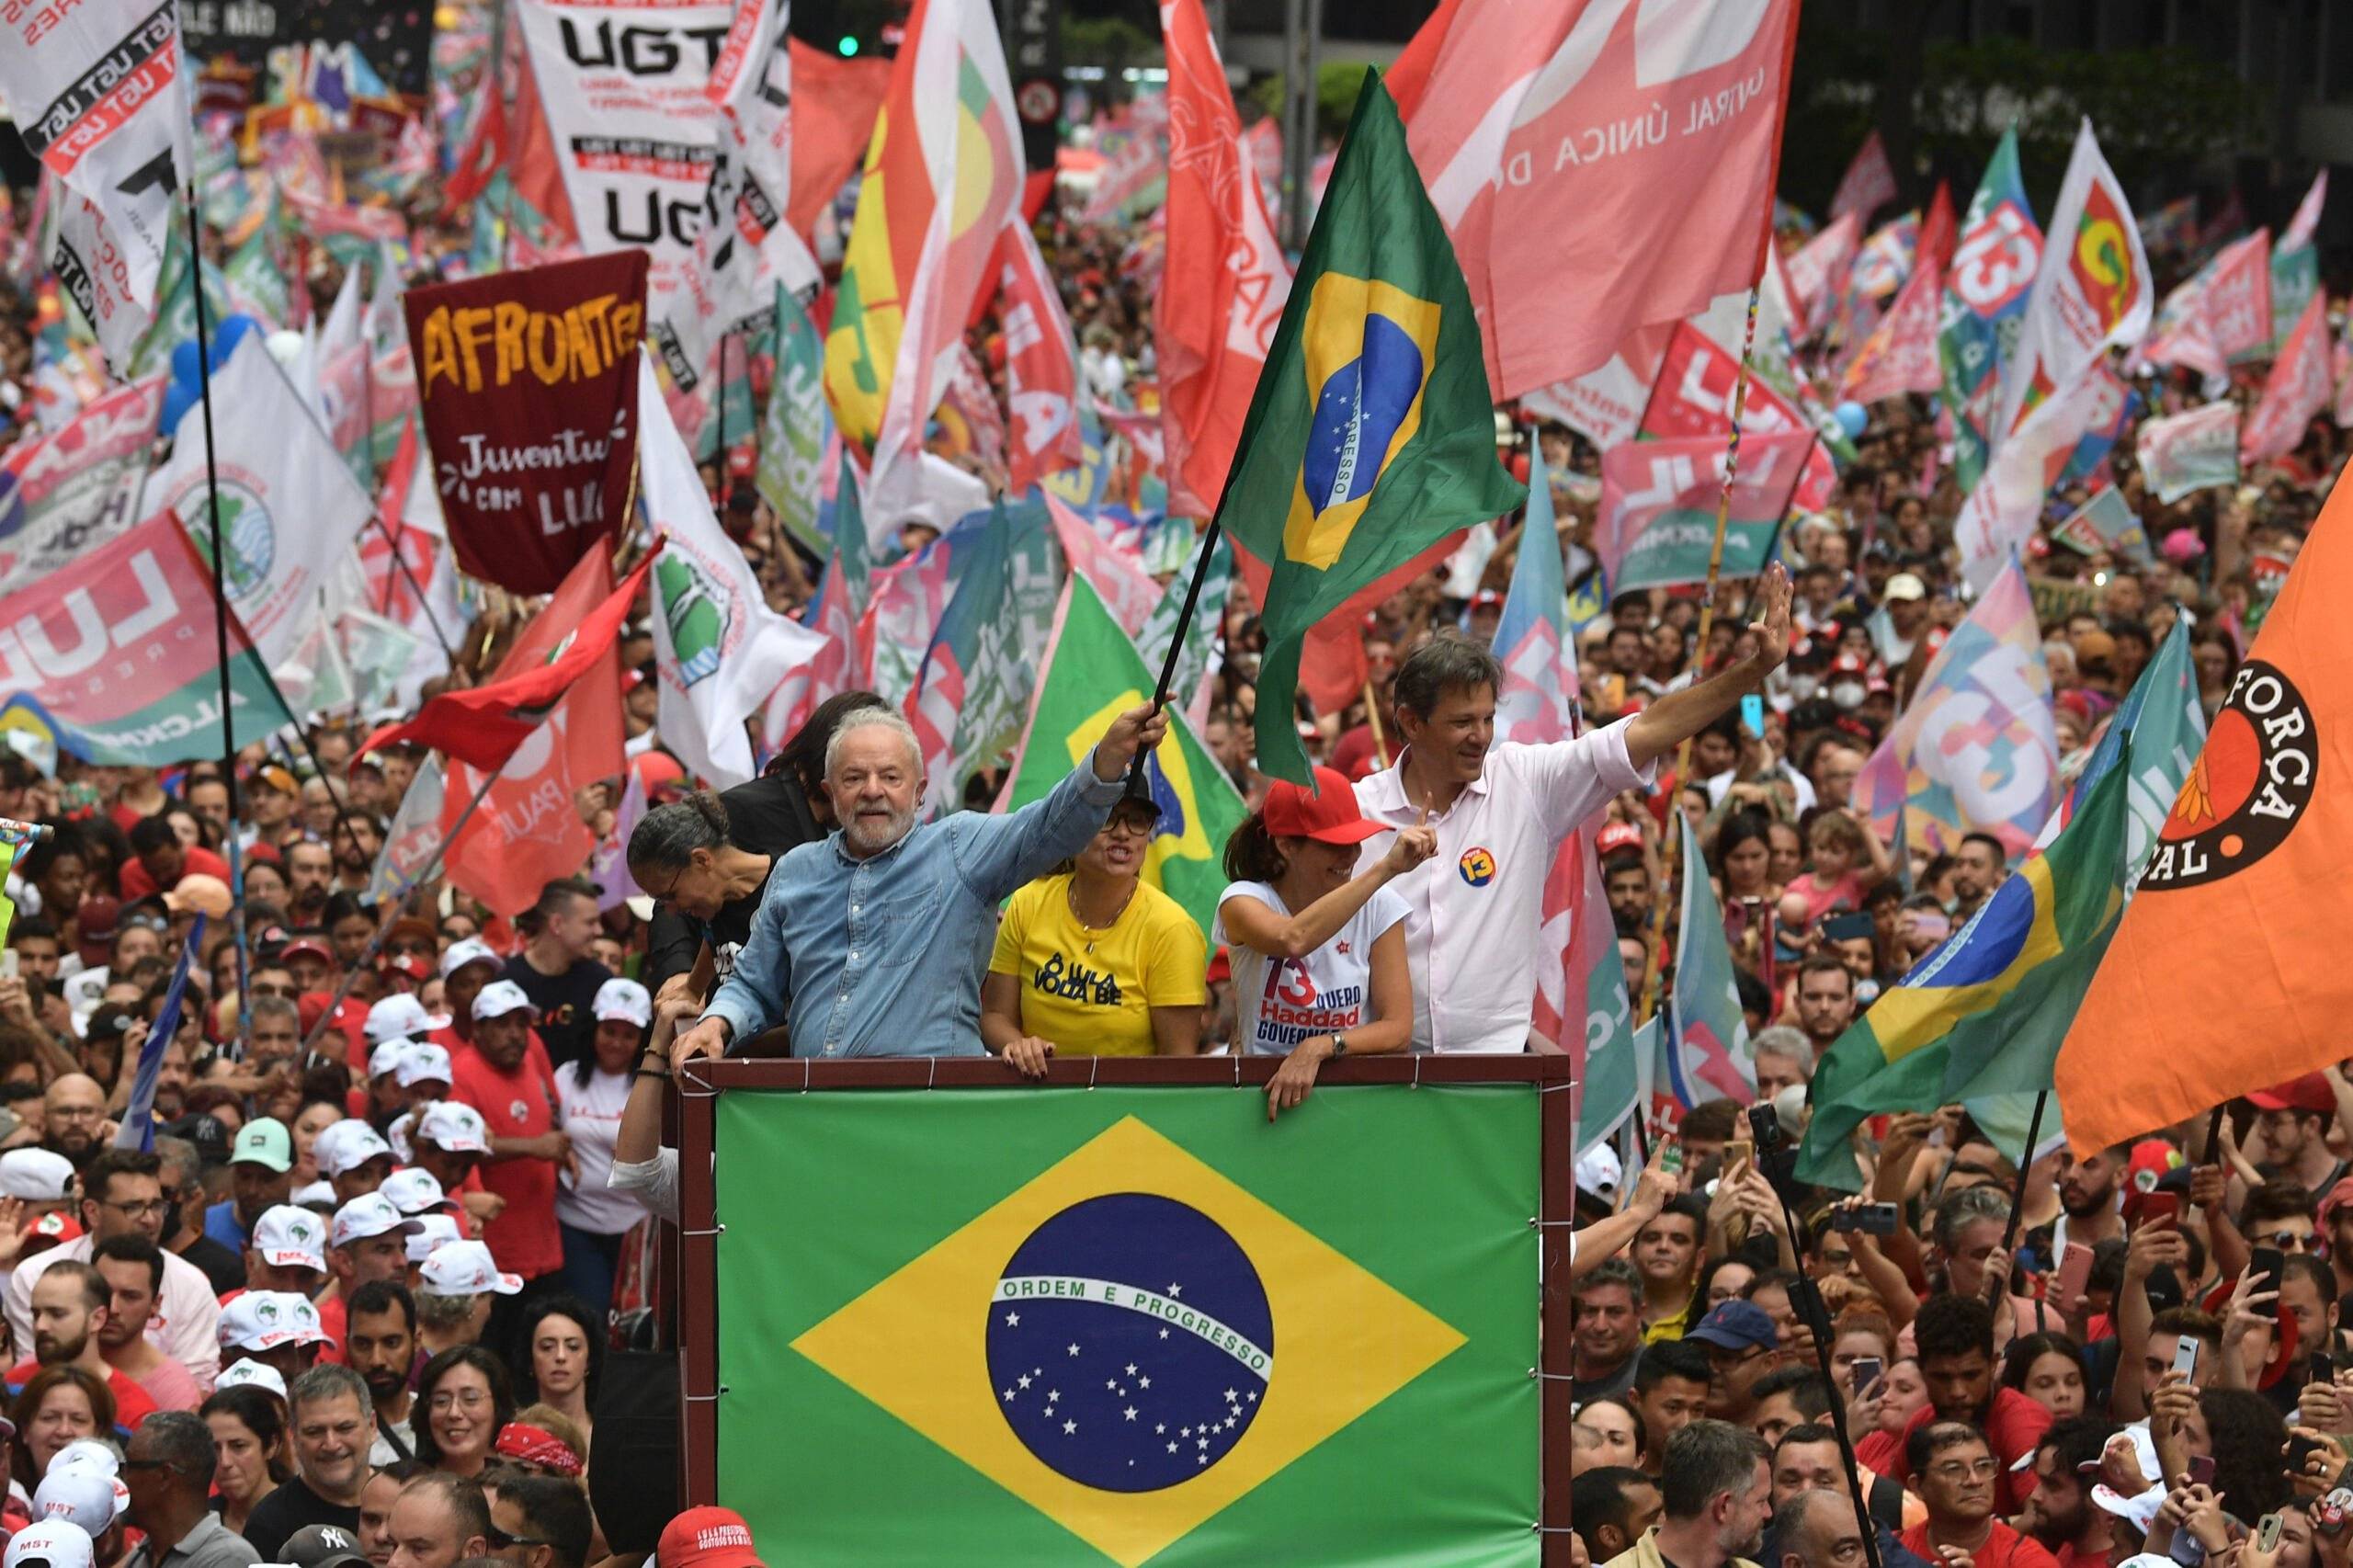 Brazilian former President (2003-2010) and candidate for the leftist Workers Party (PT) Luiz Inacio Lula da Silva waves a national flag during a campaign rally in Sao Paulo, Brazil, on October 29, 2022. - After a bitterly divisive campaign and inconclusive first-round vote, Brazil elects its next president in a cliffhanger runoff between far-right incumbent Jair Bolsonaro and veteran leftist Luiz Inacio Lula da Silva. (Photo by CARL DE SOUZA / AFP)